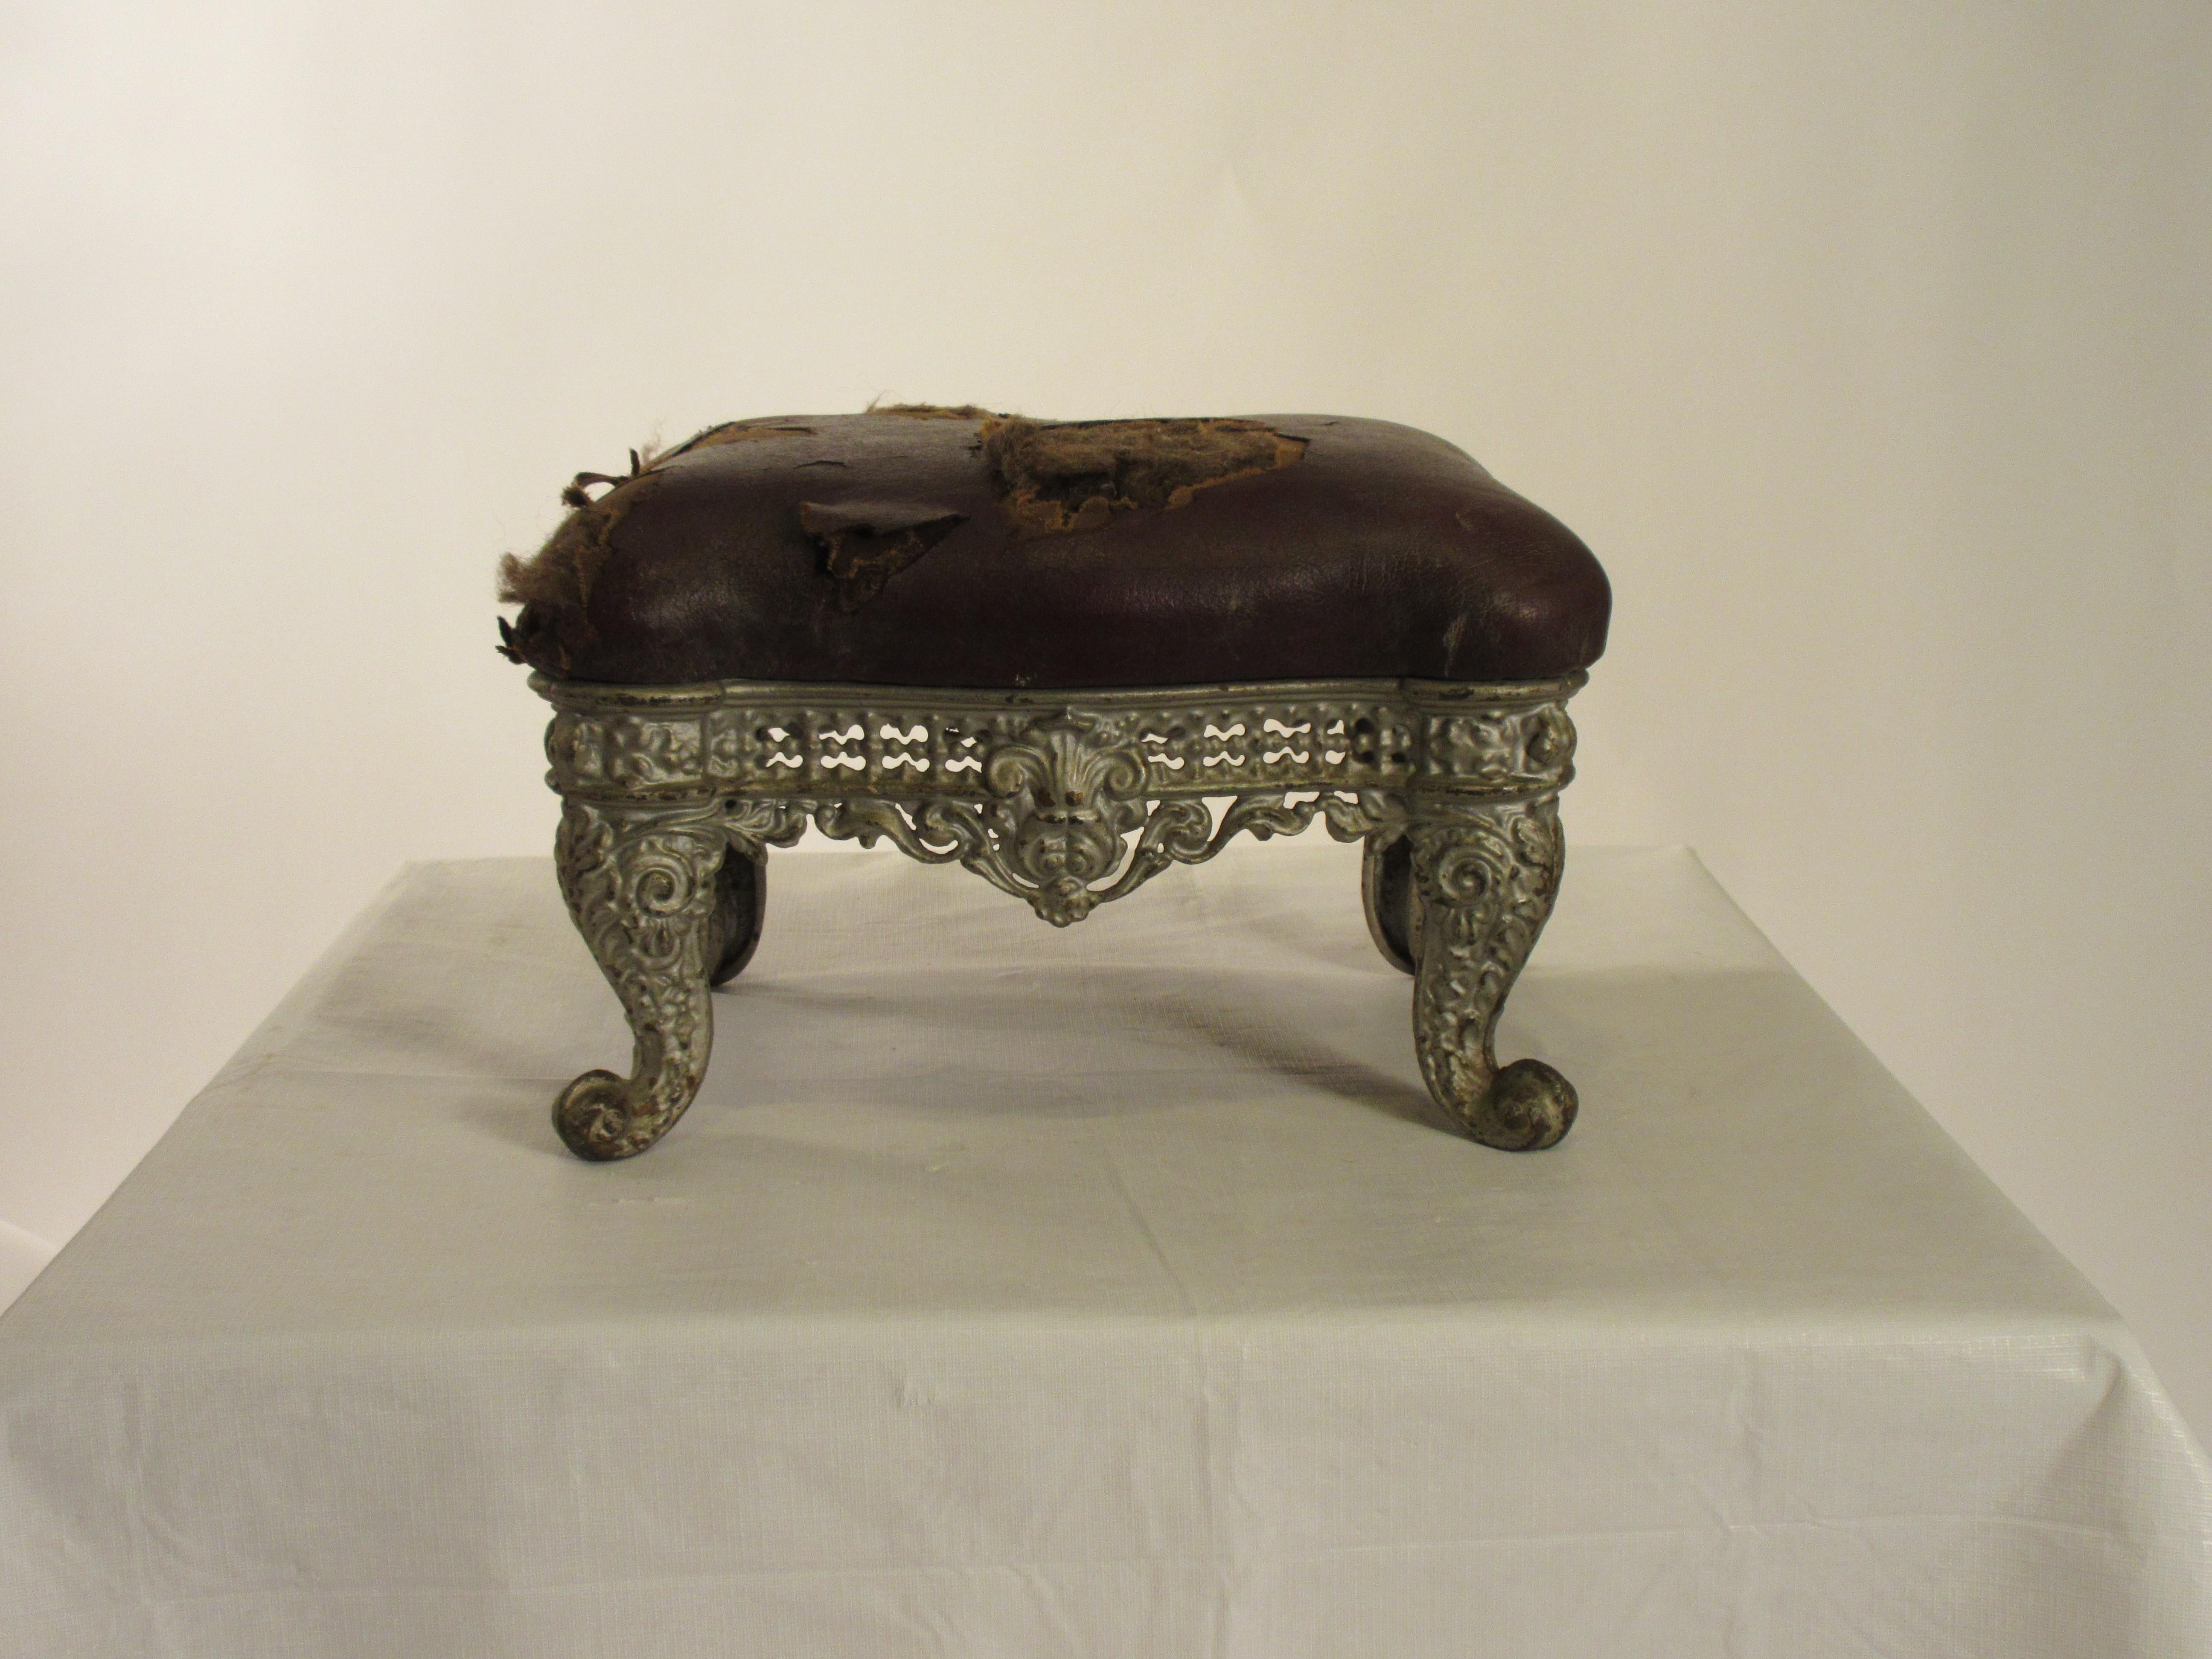 1890s iron ornate footstool with original leather. Needs reupholstering.